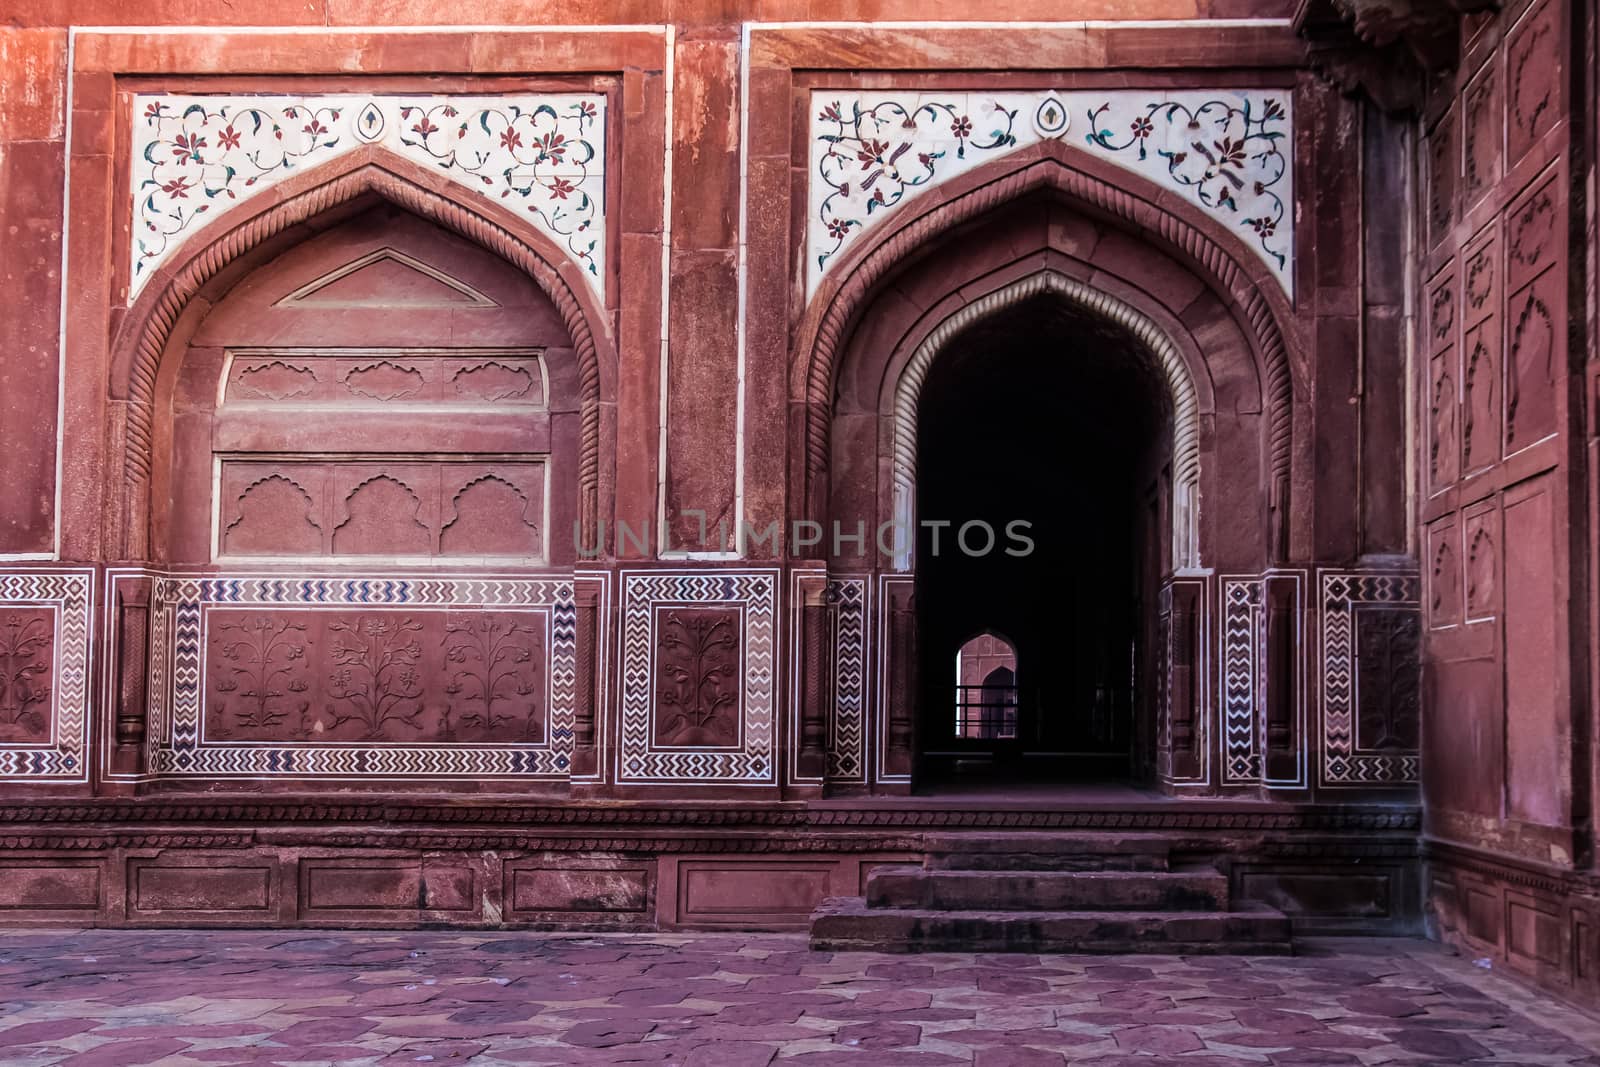 On Either side of Taj Mahal Lie these Buildings of Red Sandstone with Arches, Arched Doorways and courtyards. Contrasting red stone and white marble Inlay of various floral and geometric designs with coured stones as well aspanels with  basreliefs of floral designs